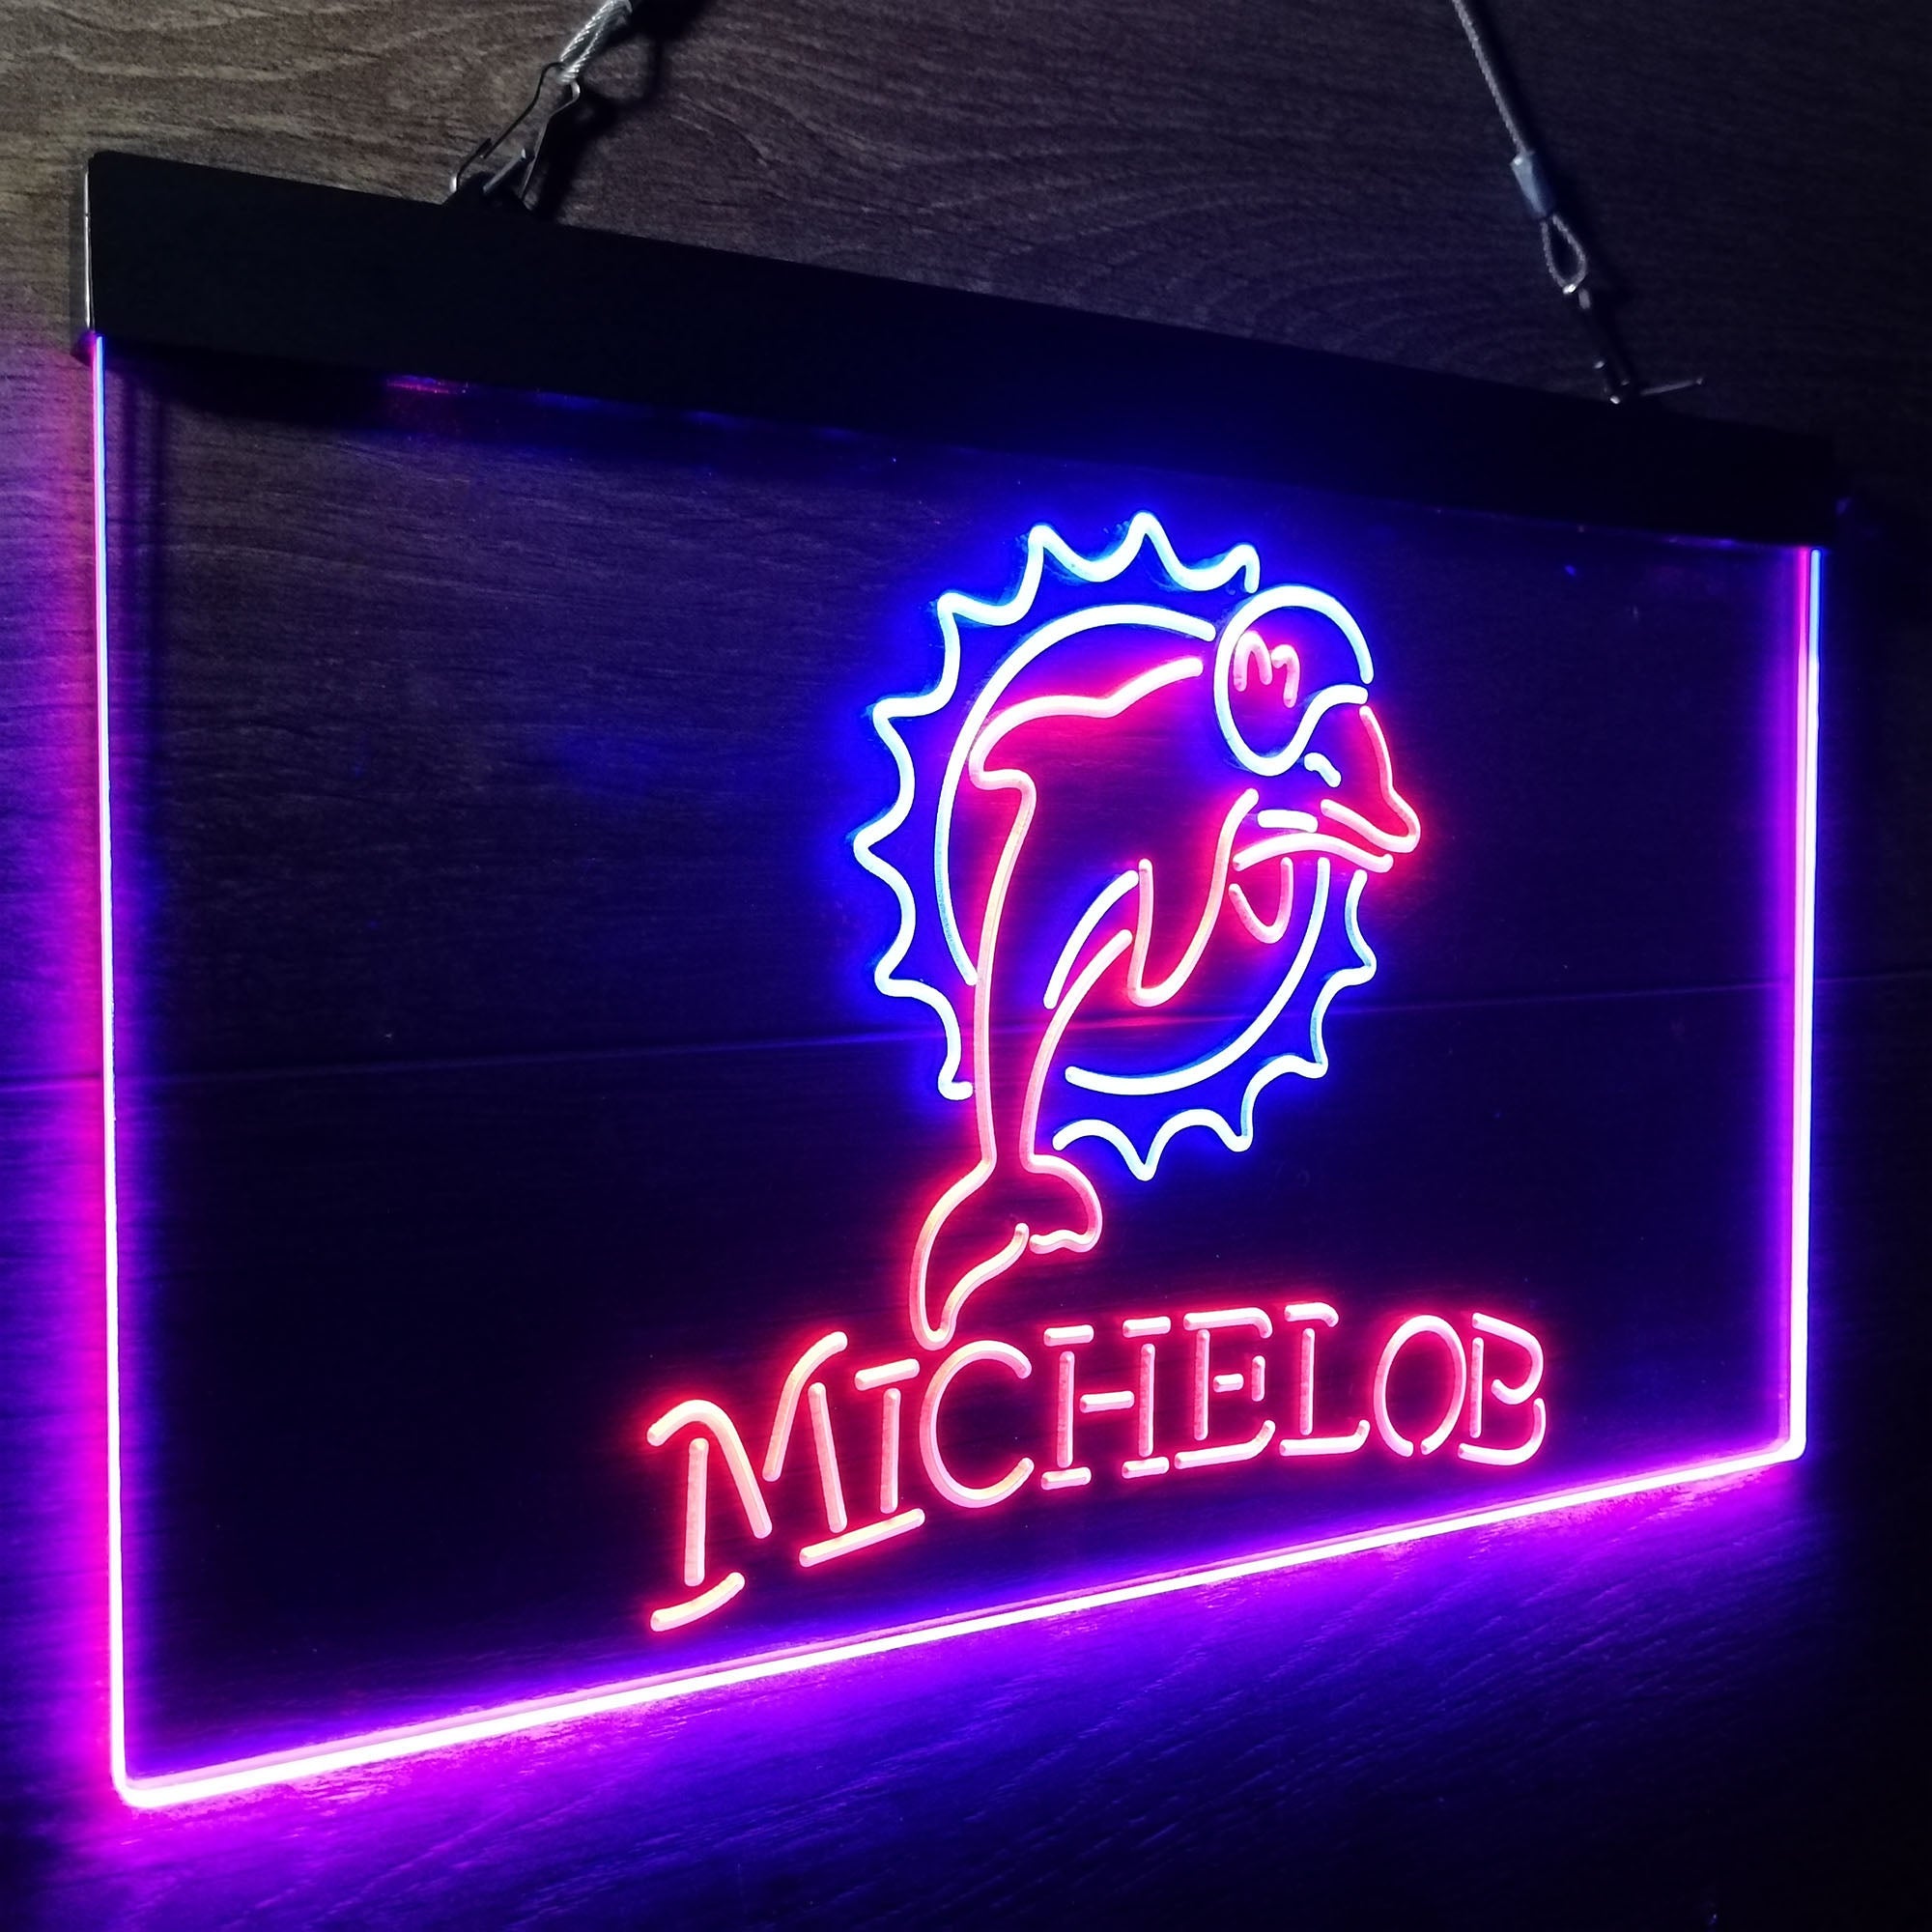 Michelob Bar Miami Dolphins Est. 1966 LED Neon Sign